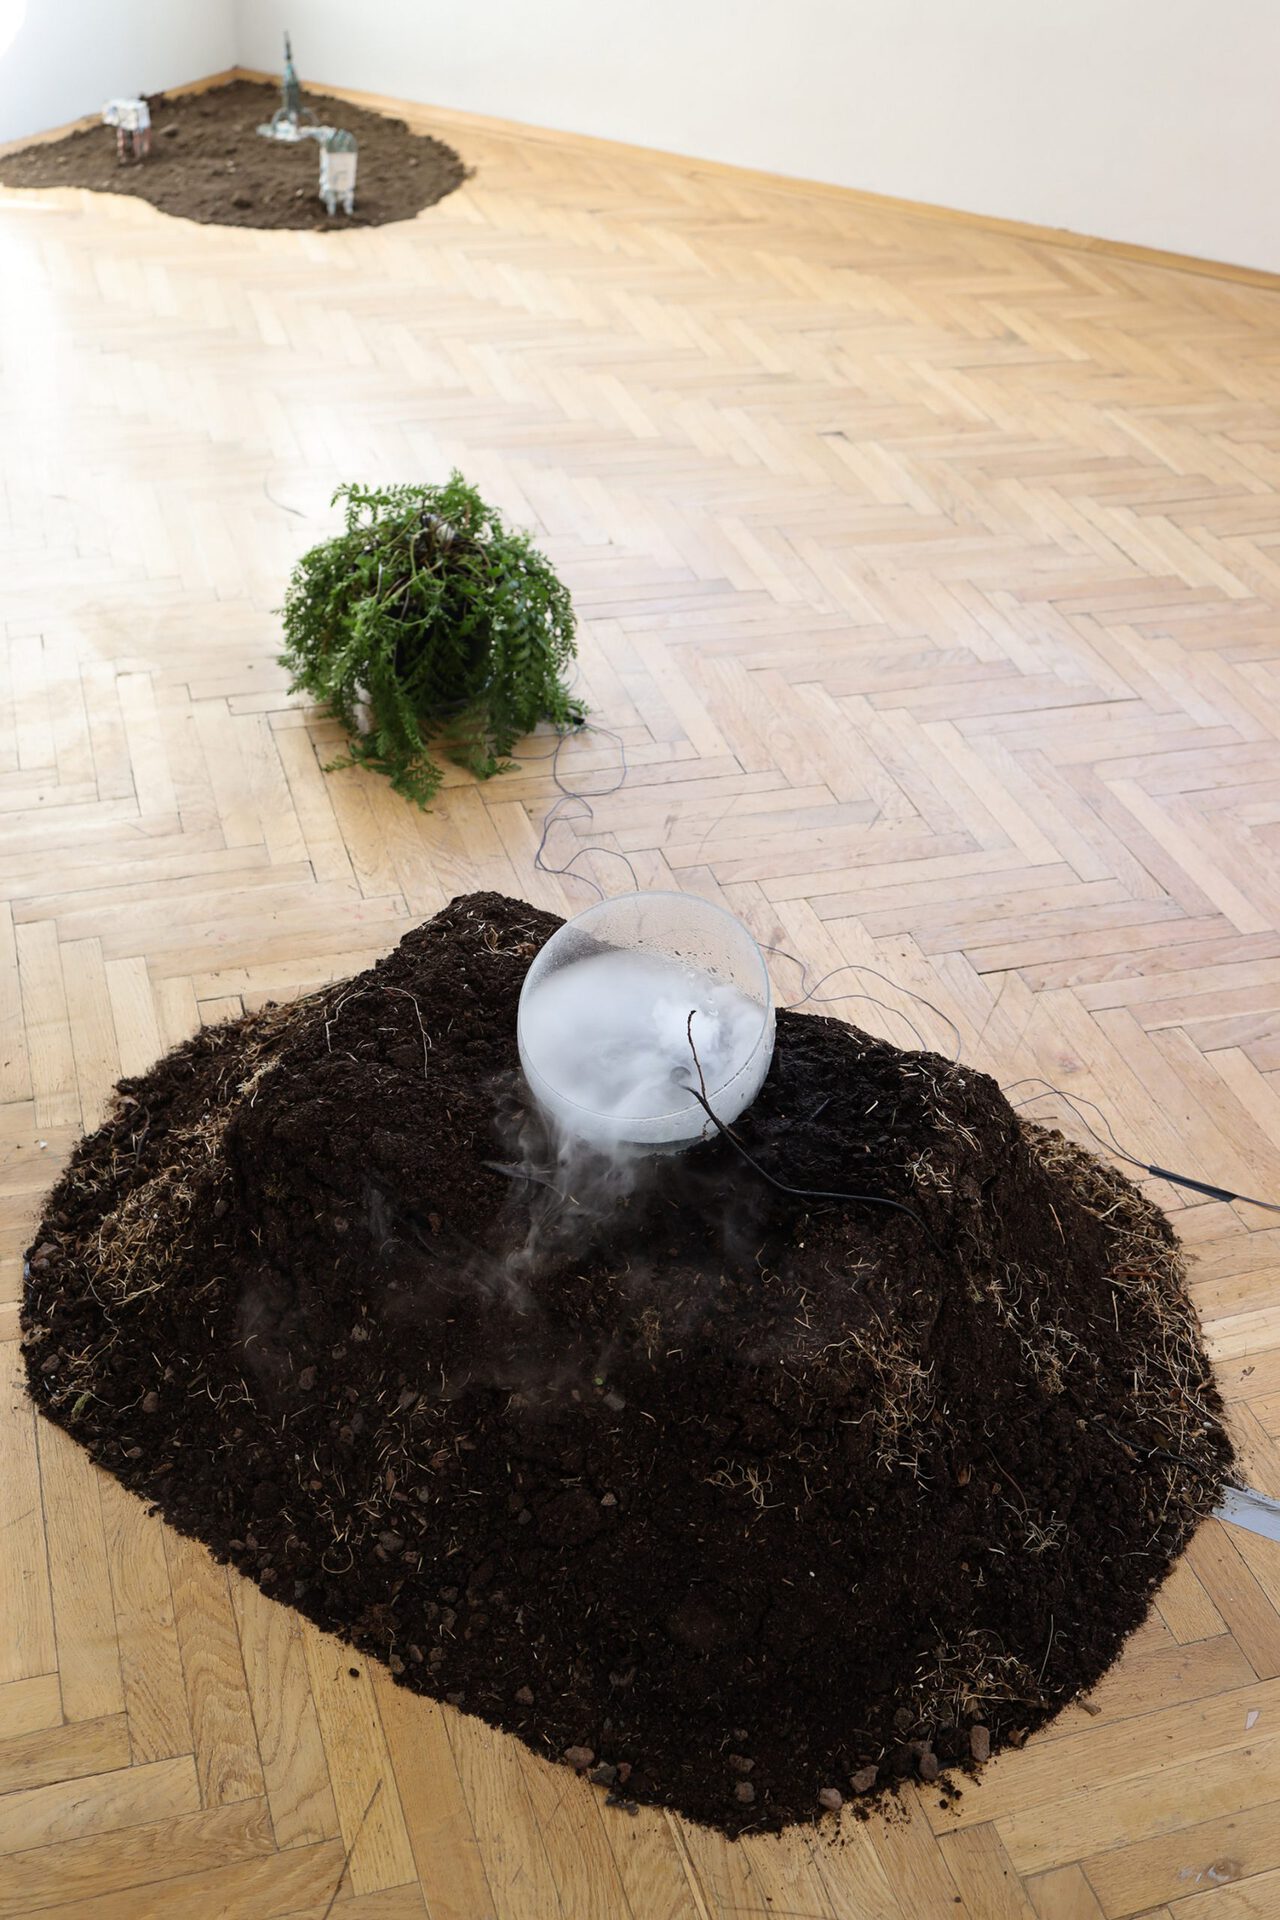 Lena Violetta Leitner TREMATE, 2022, glass bowl, soil (mostly from Oberlaa, where Teresa Feodorowna Ries‘ sculpture „Witch“ was found), mist maker, variable dimensions